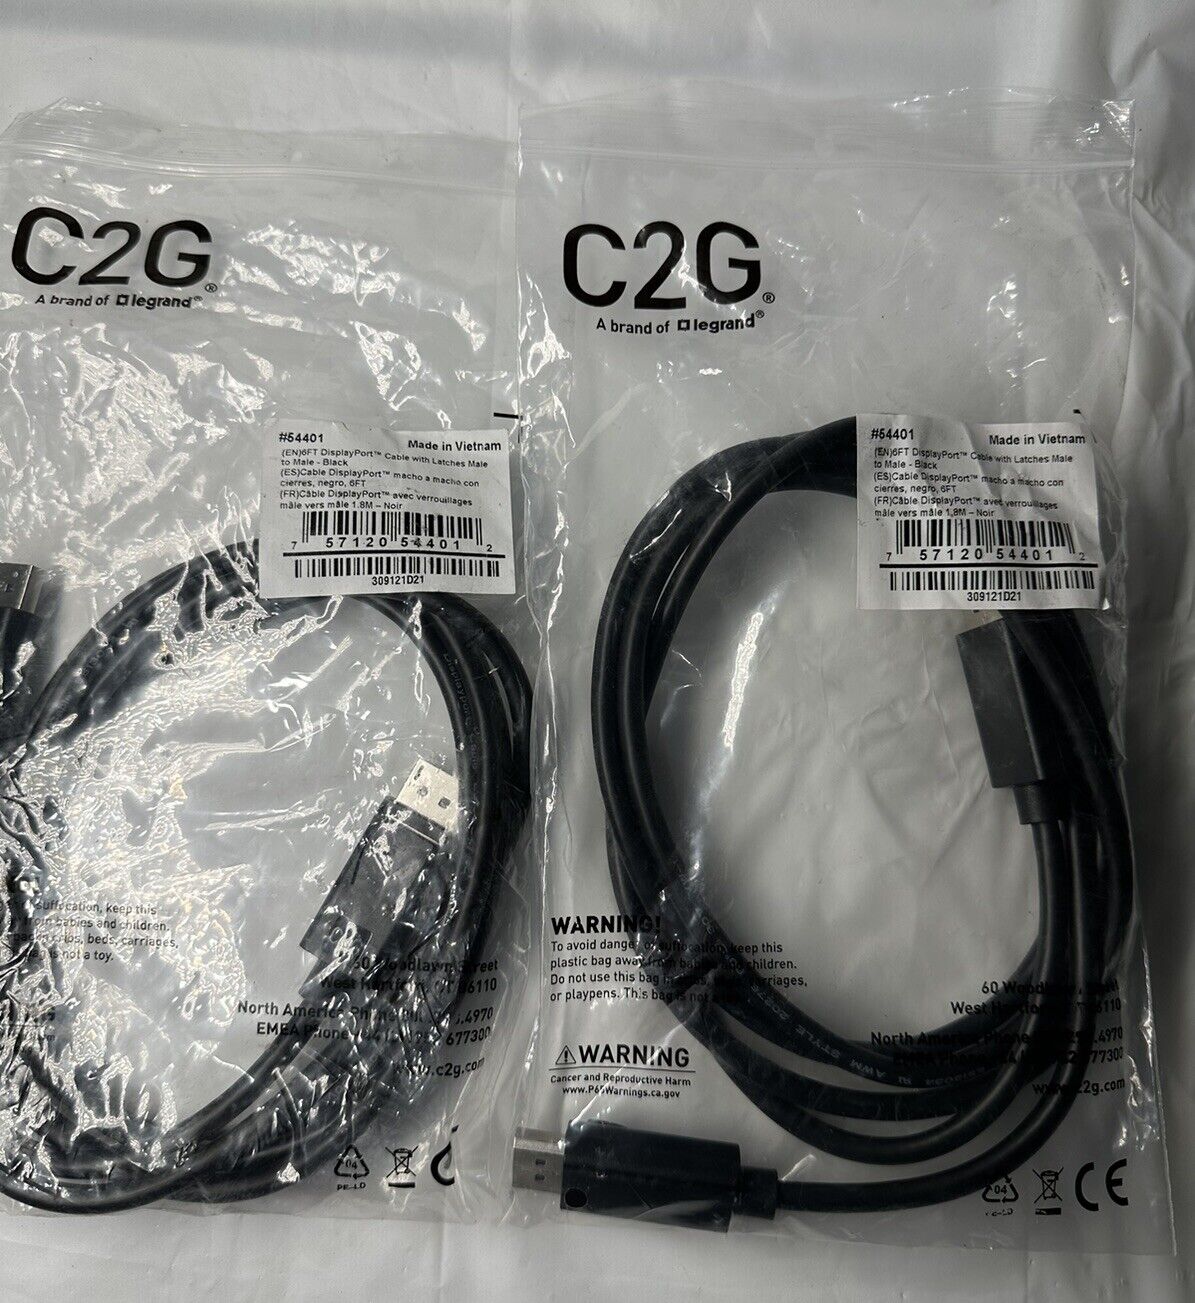 2-PACK LEGRAND C2G 54401 6ft DISPLAYPORT VIDEO MONITOR CABLE W/LATCHES MALE-MALE